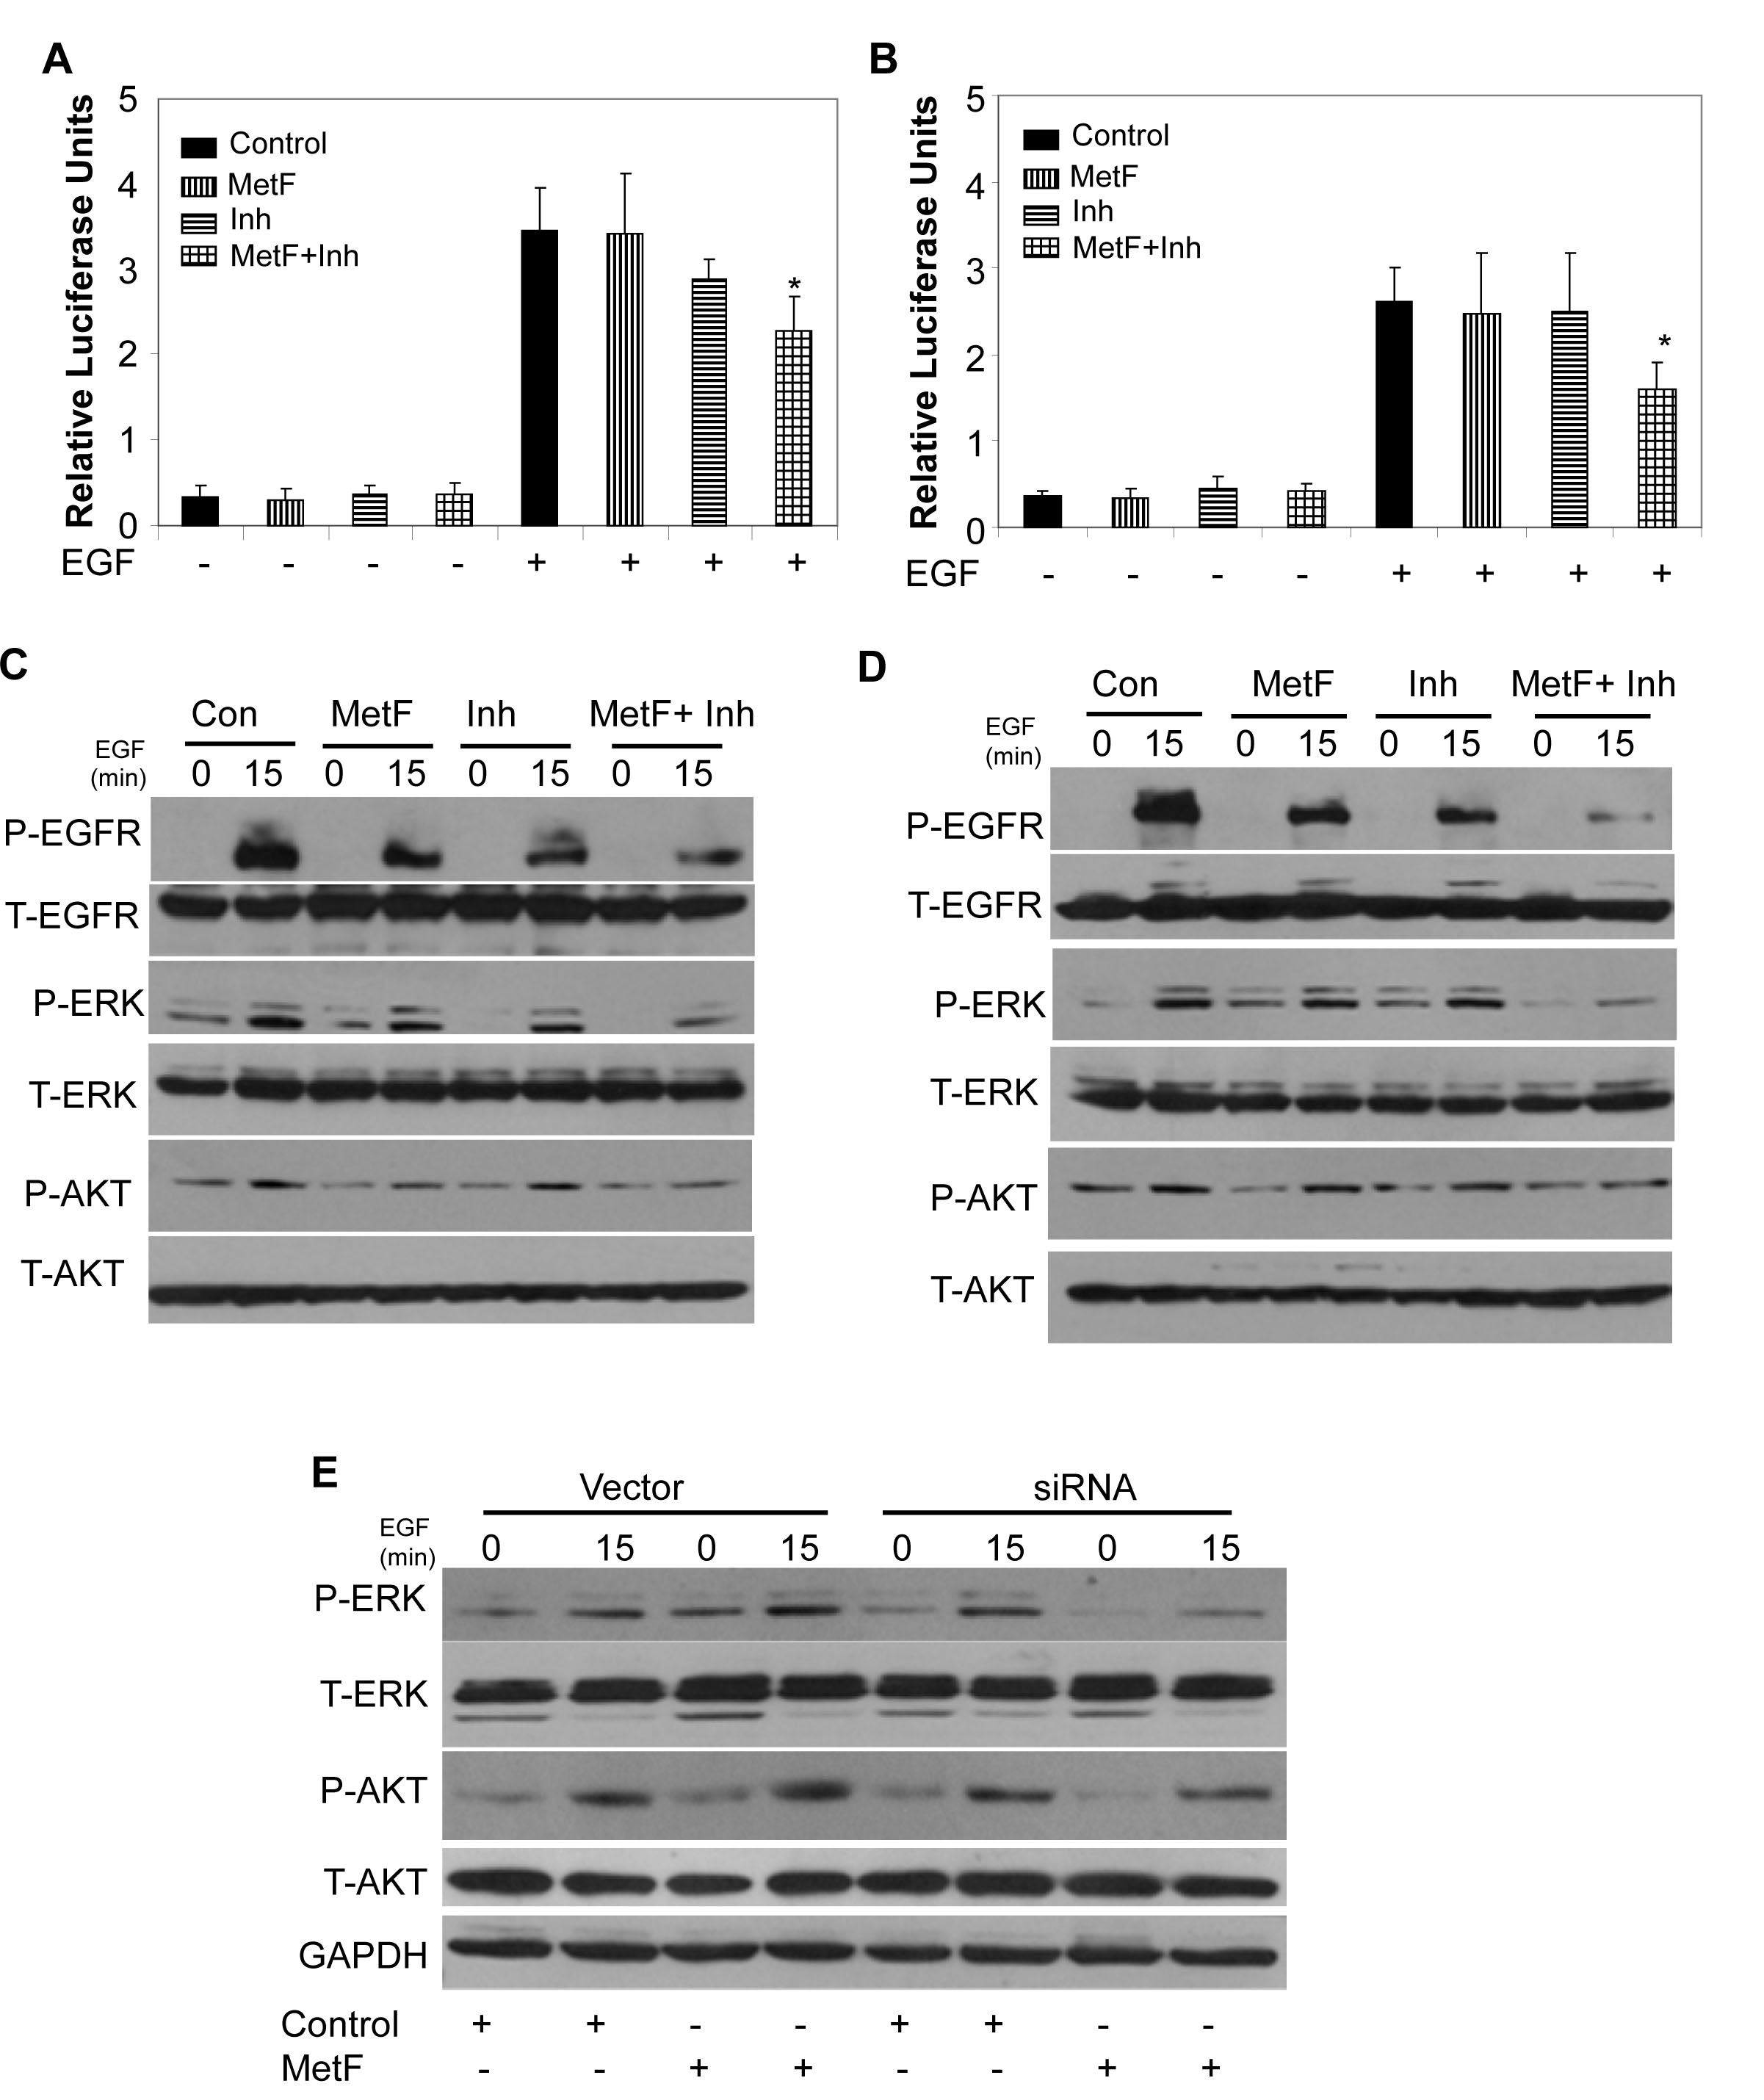 FAAH inhibition enhances Met-F-AEA mediated inhibition of EGFR signaling in NSCLC cell lines.